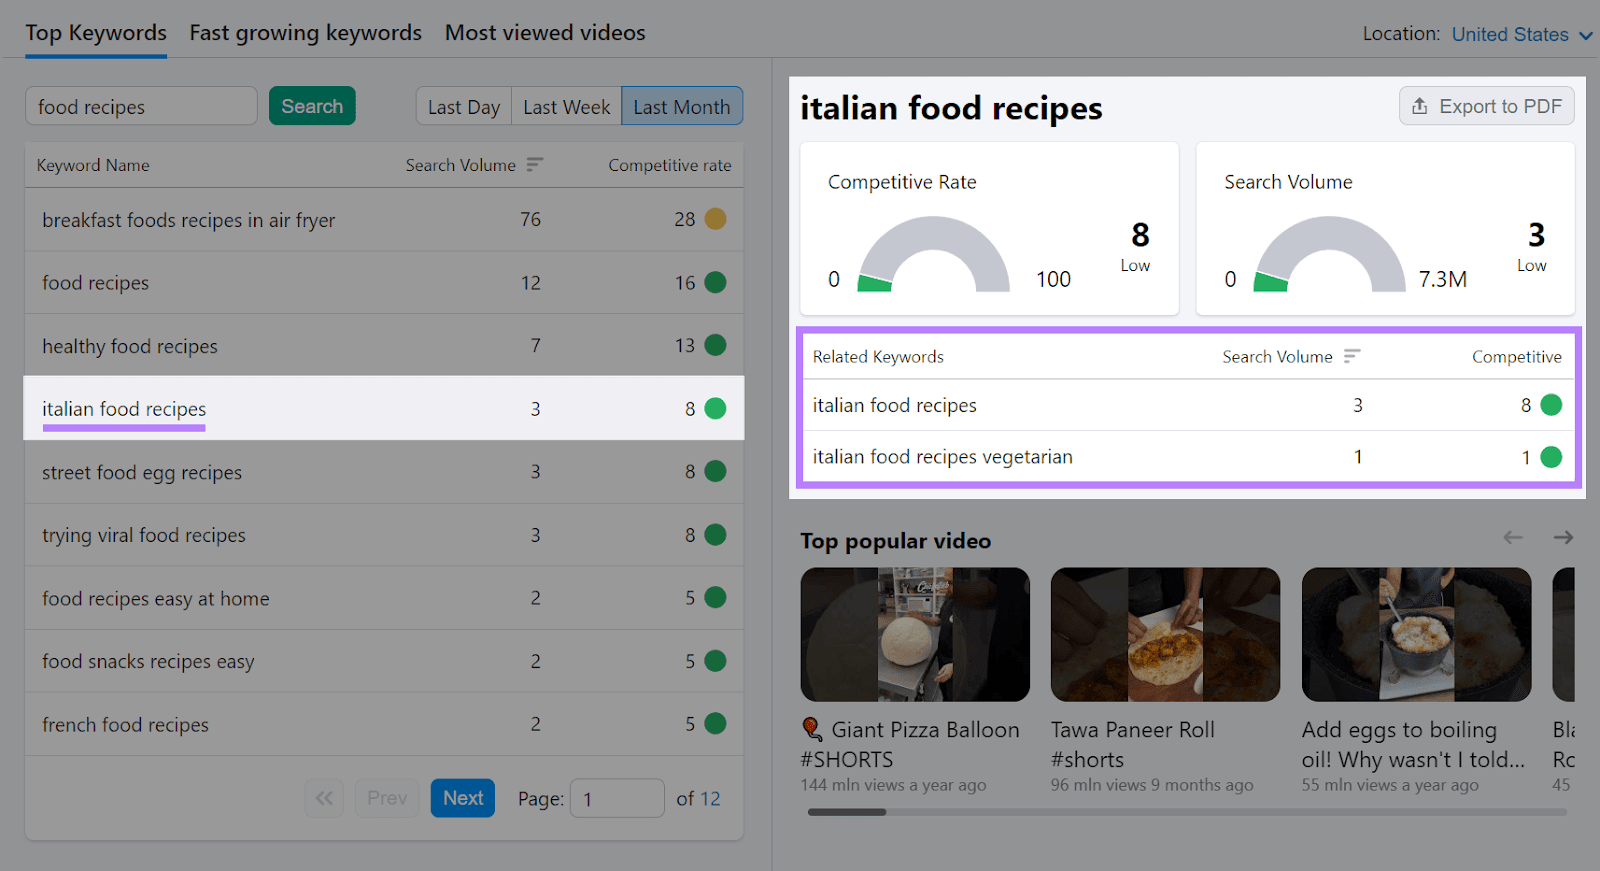 "italian food recipes" competitive rate, search volume, and related keywords